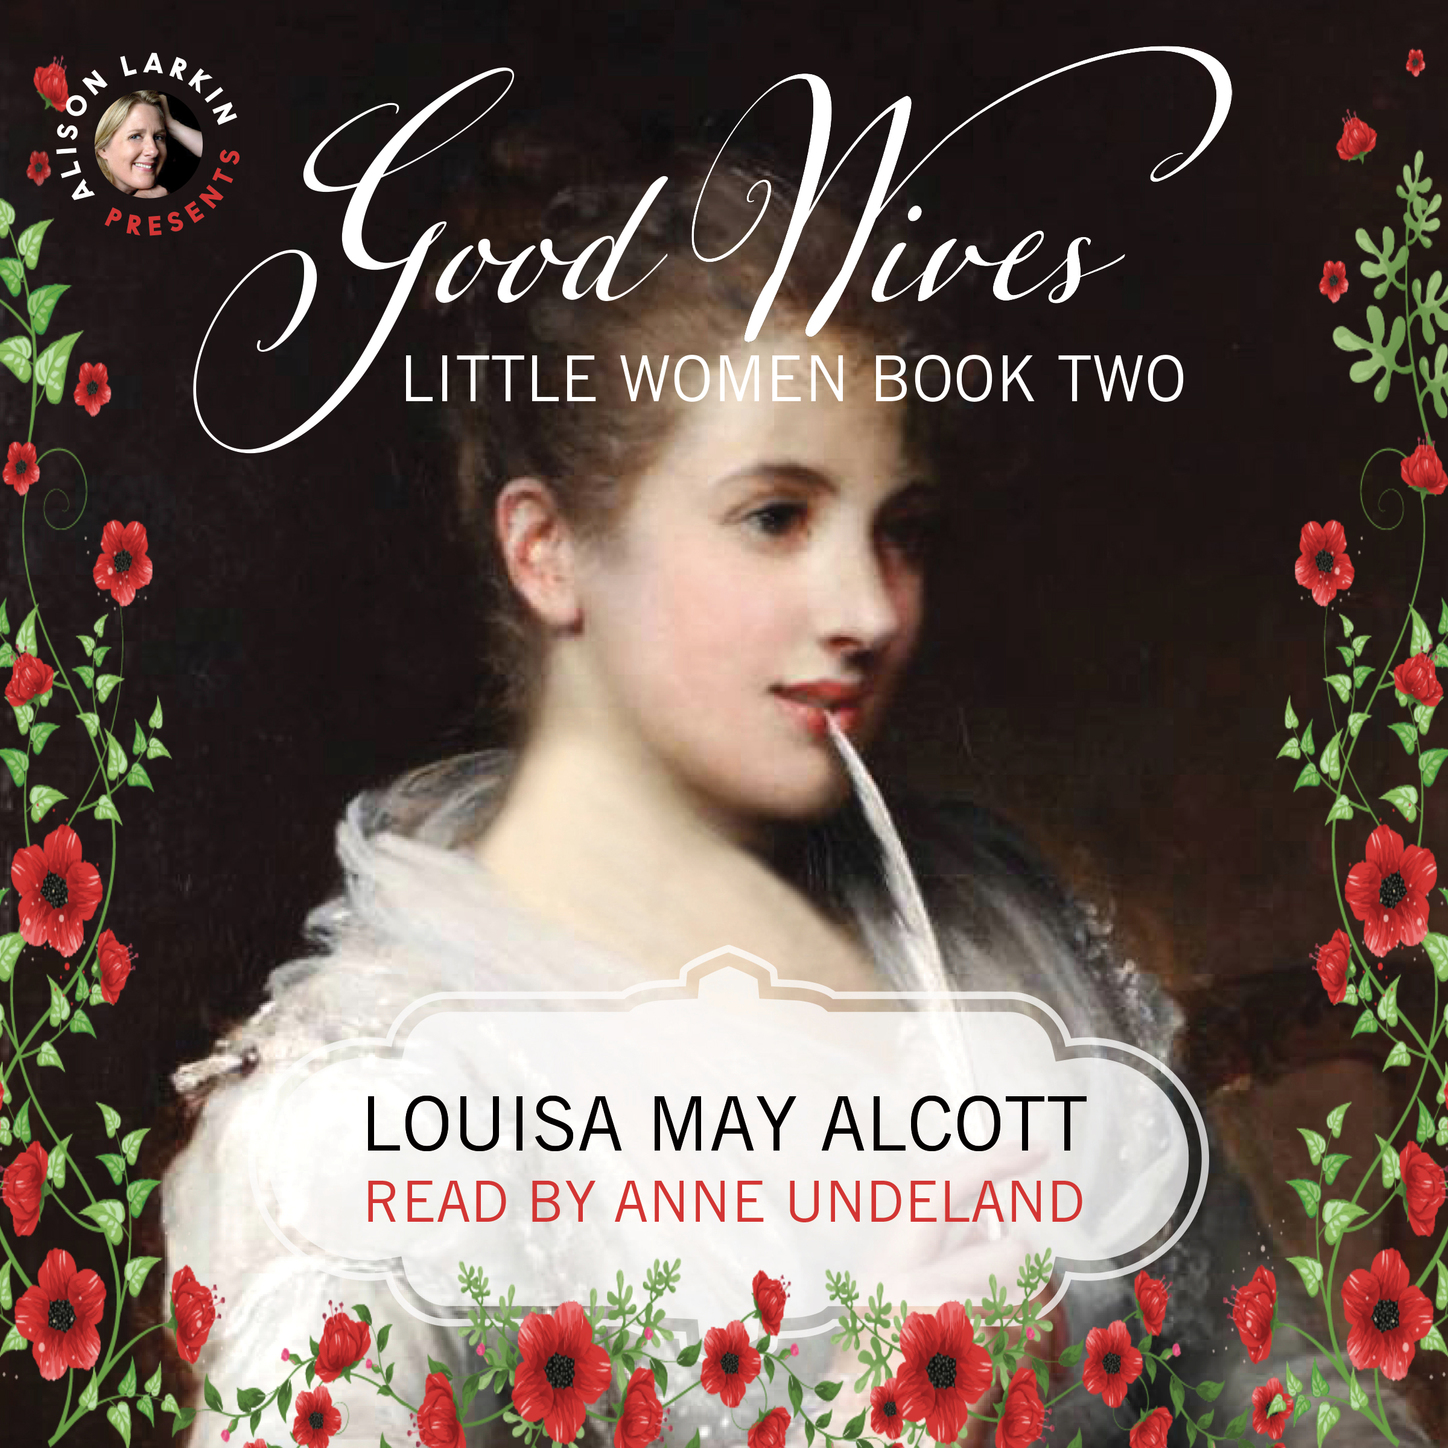 The wife book. Little women & good wives книга. Little women Louisa May Alcott book. Little women book Автор.